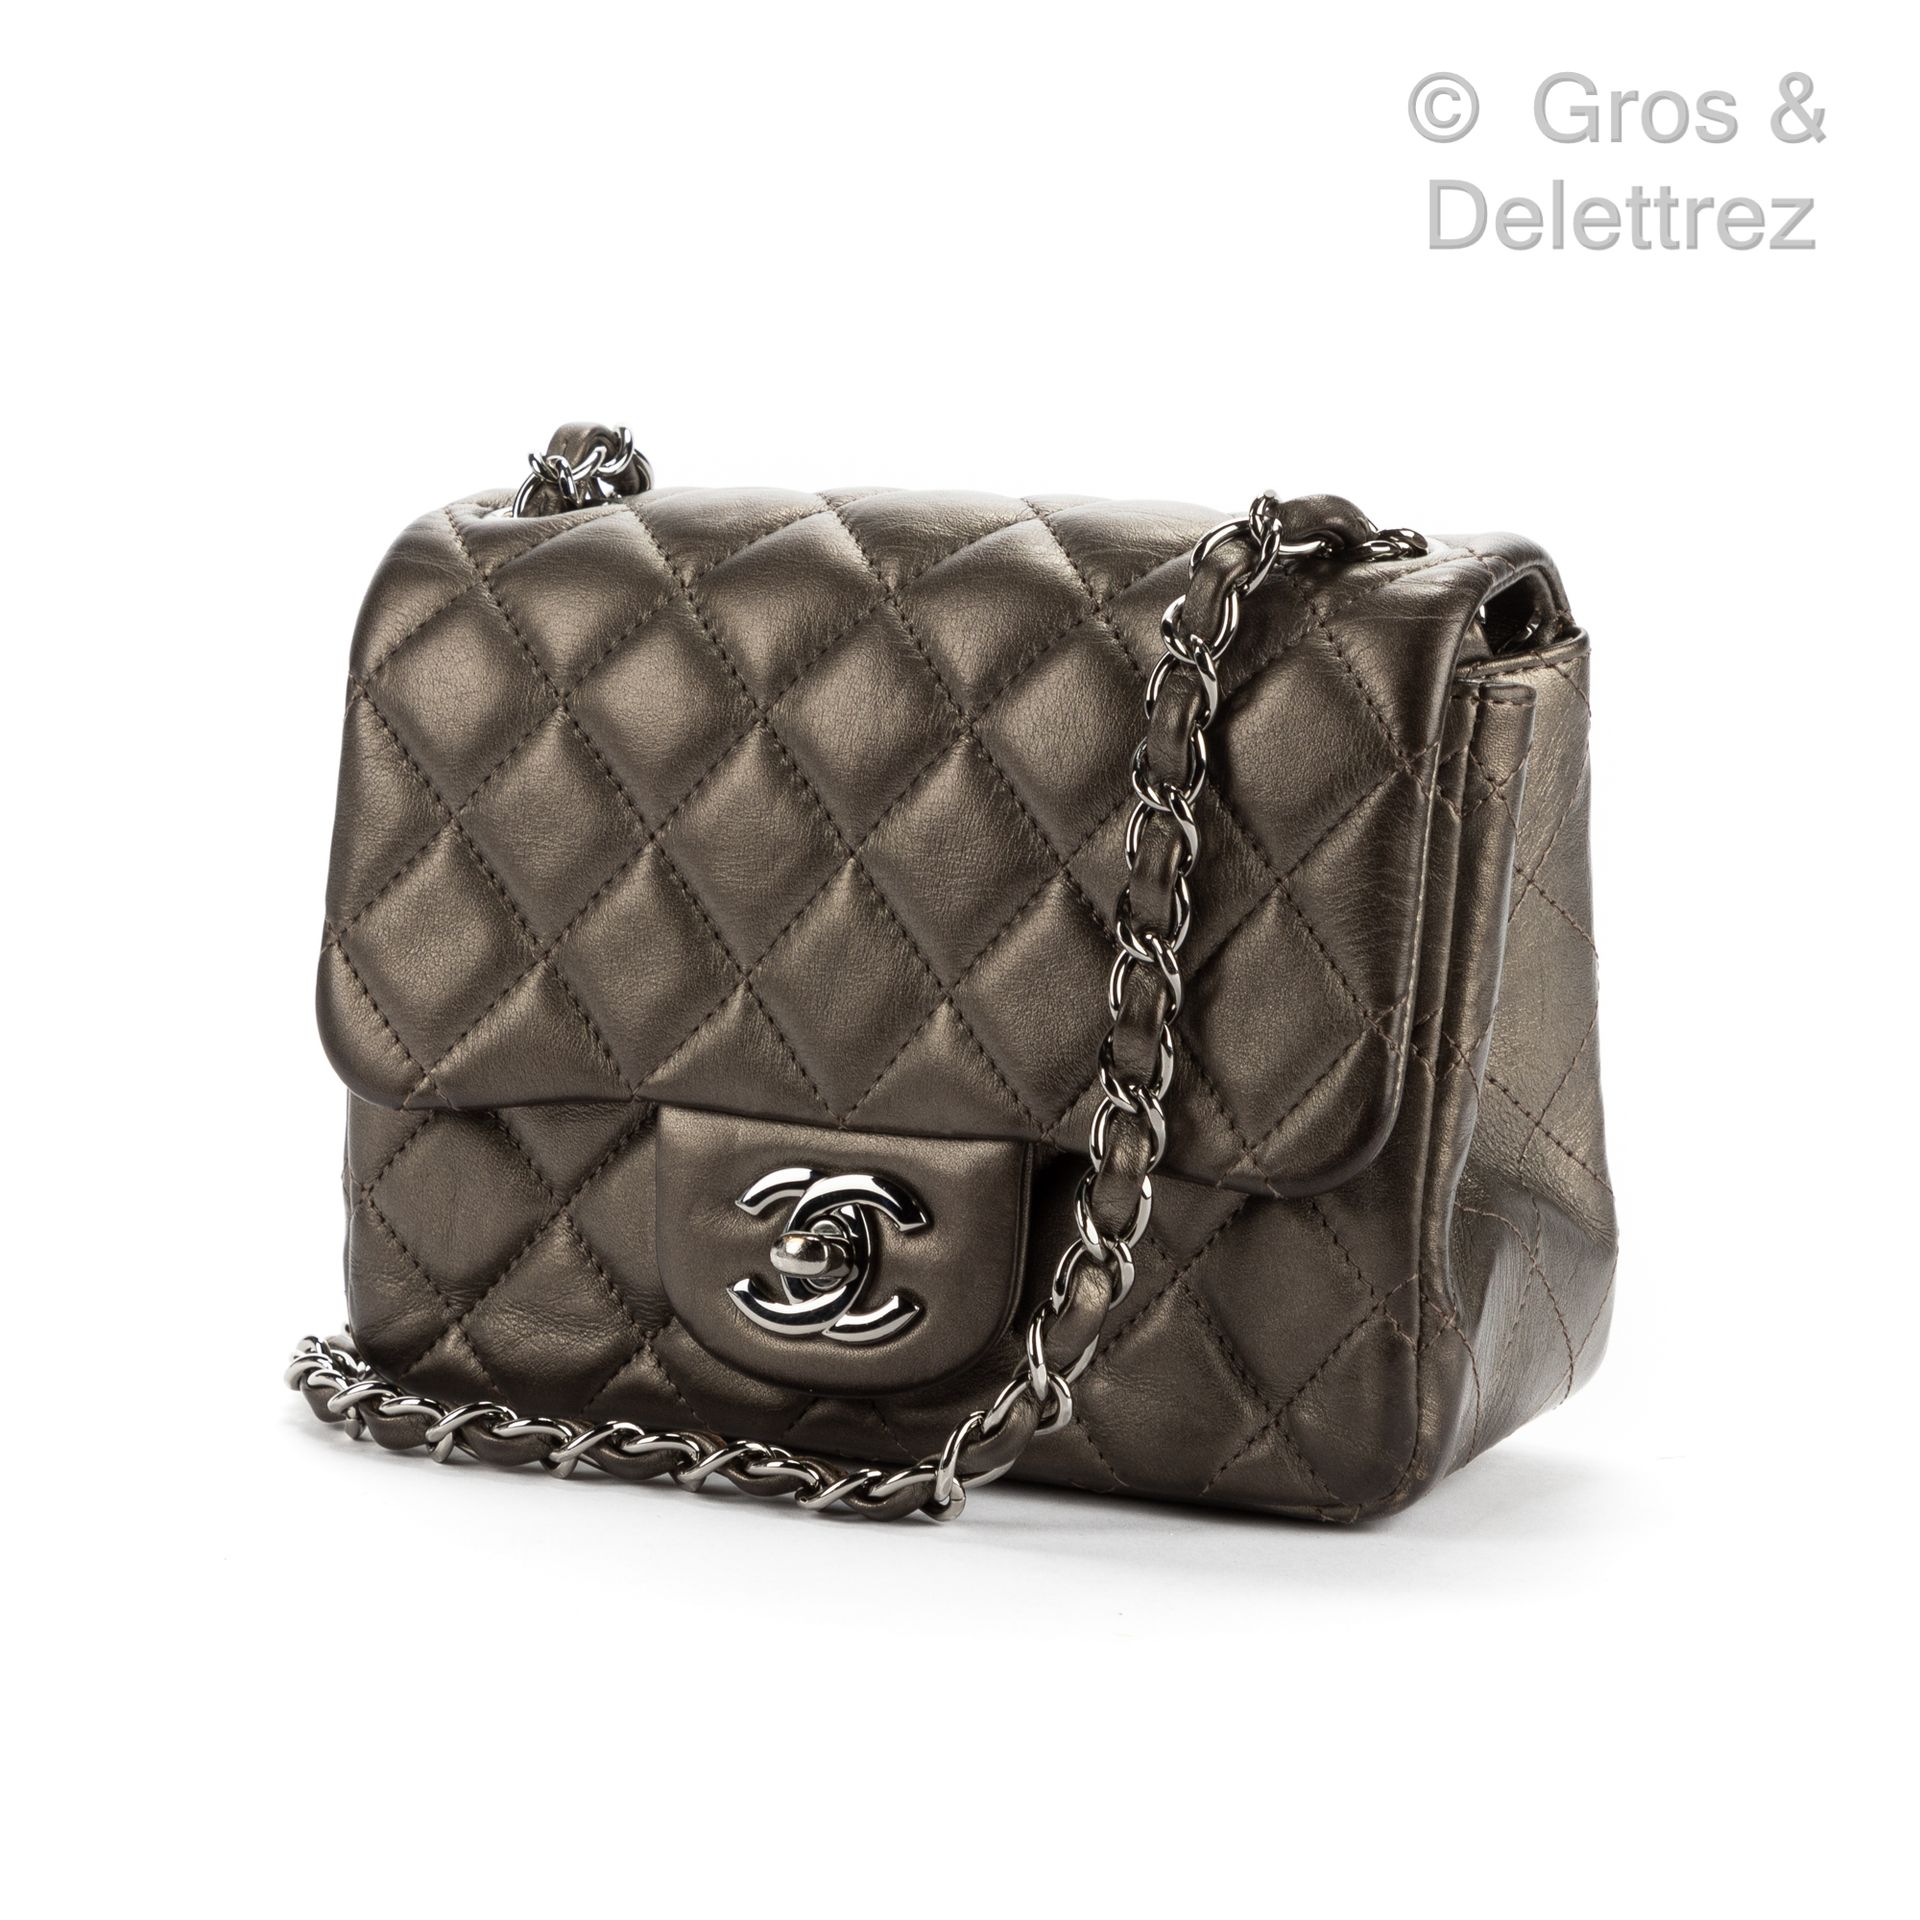 CHANEL Circa 2012

"Mini Timeless" bag 16 cm in silver-grey quilted lambskin lea&hellip;